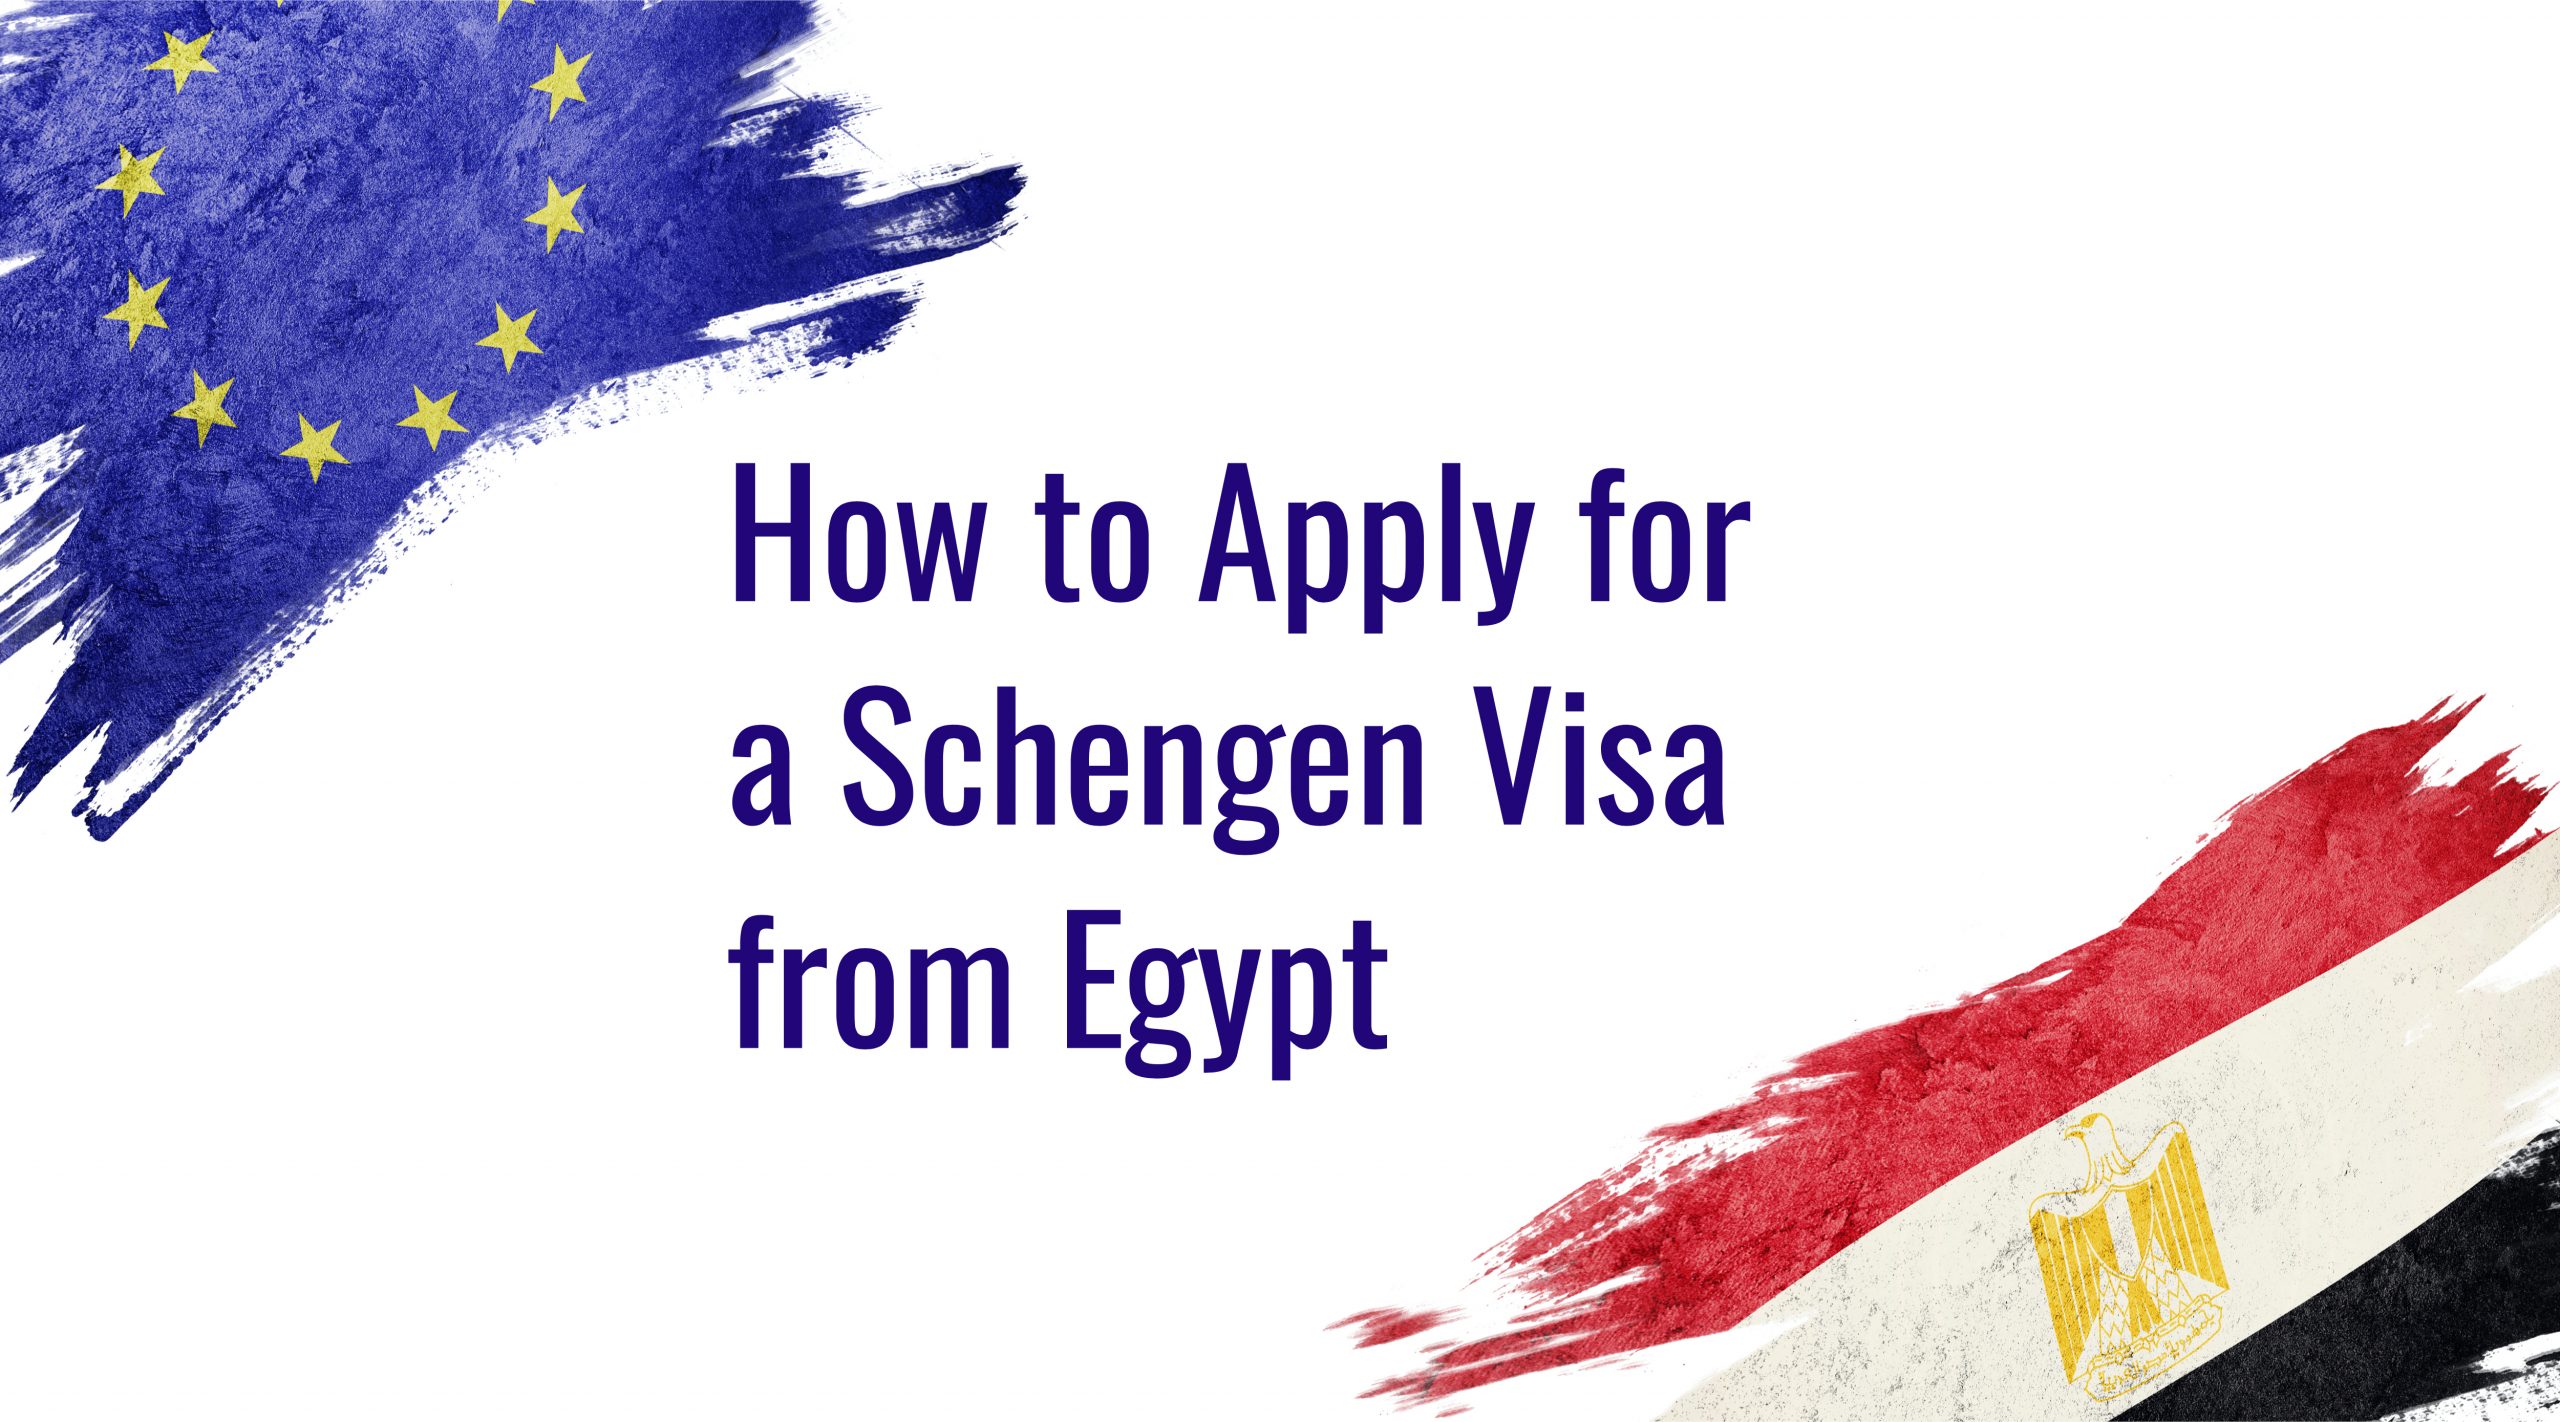 How to apply for a Schengen visa from Egypt